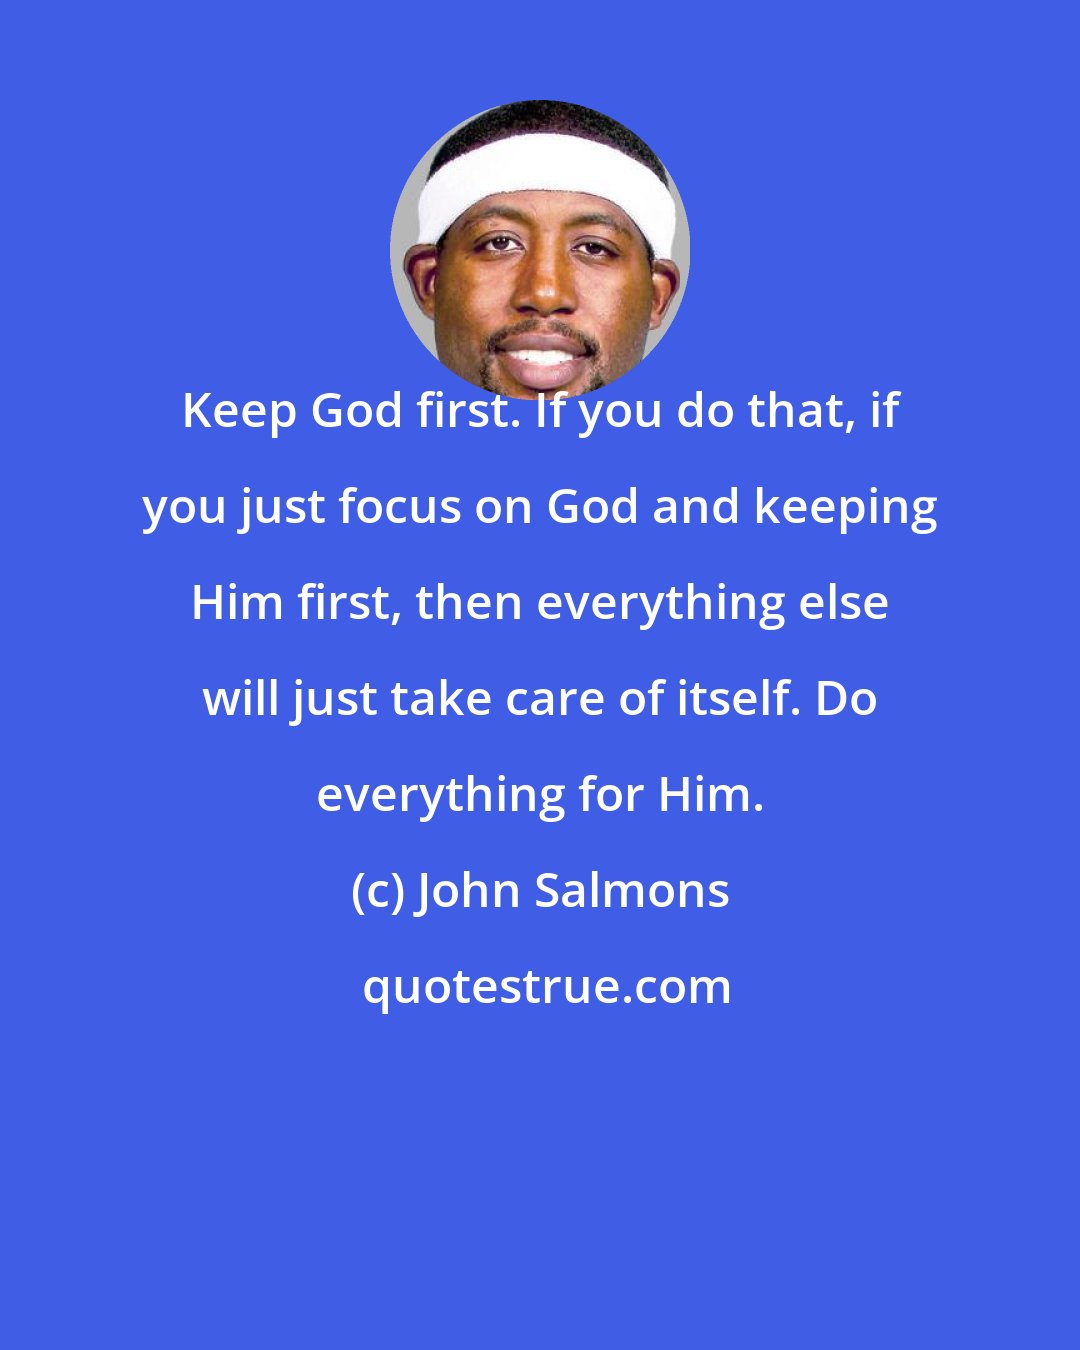 John Salmons: Keep God first. If you do that, if you just focus on God and keeping Him first, then everything else will just take care of itself. Do everything for Him.